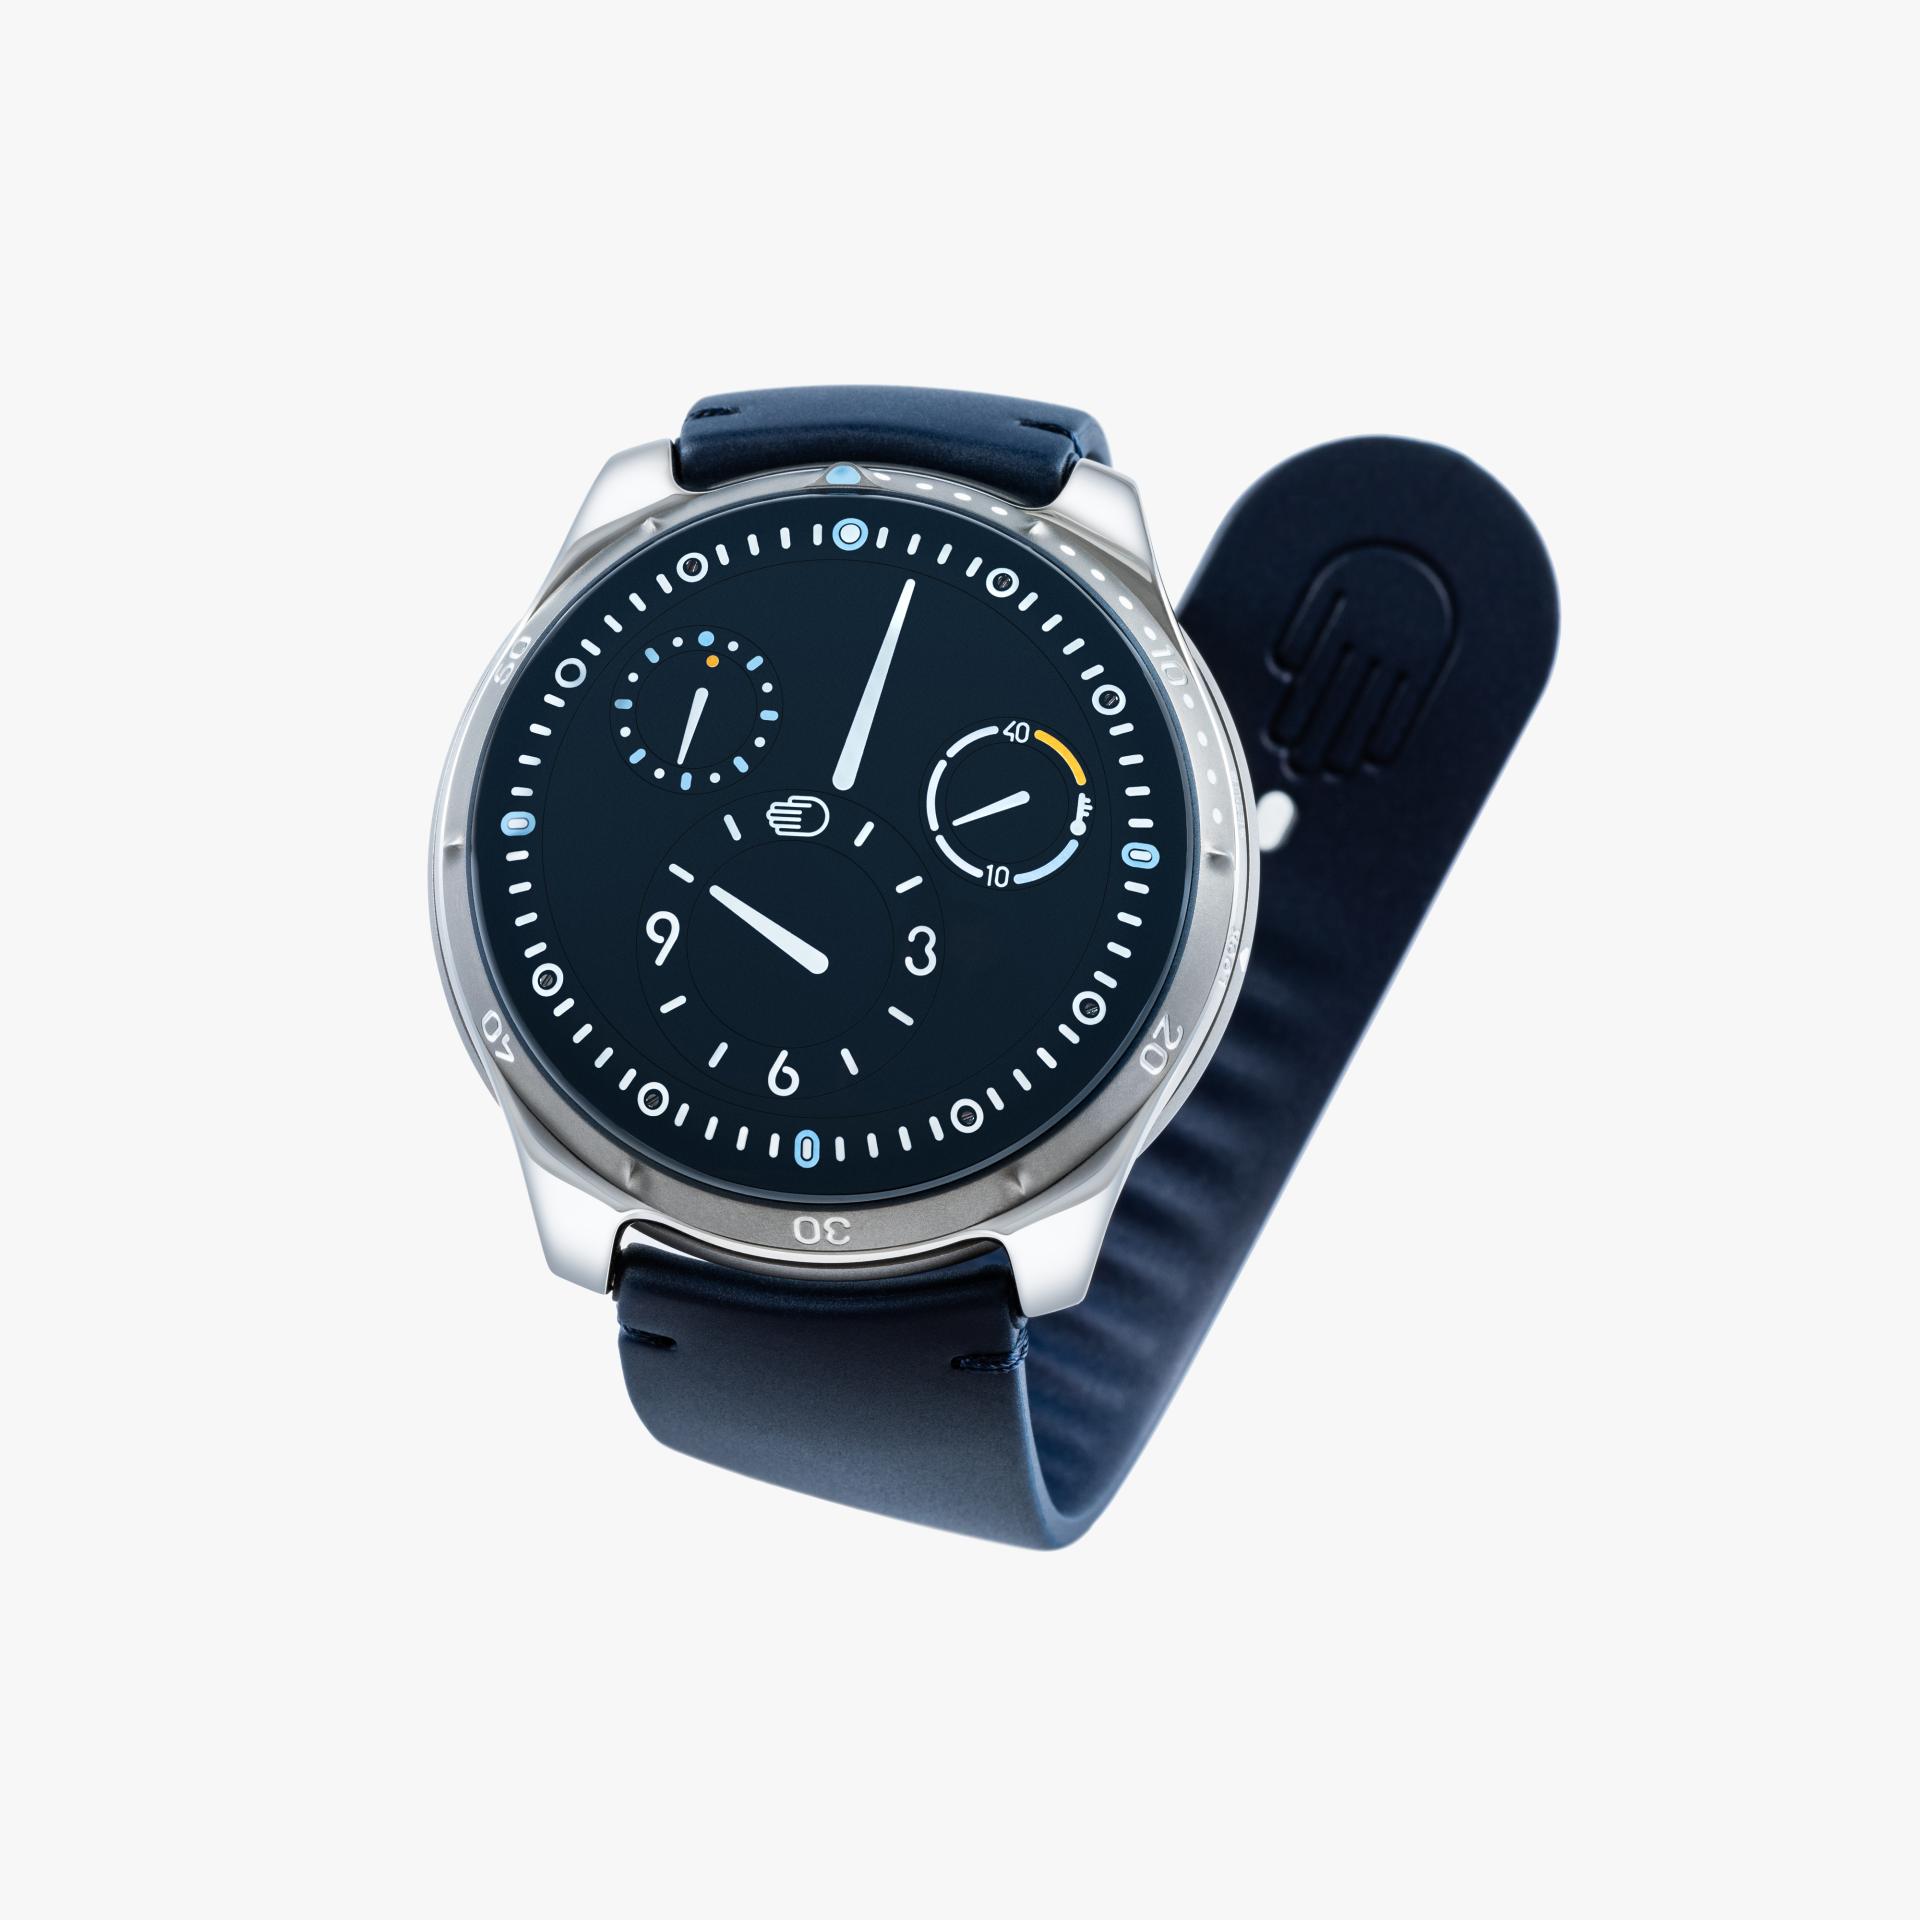 Type 5 Night Blue made by Ressence